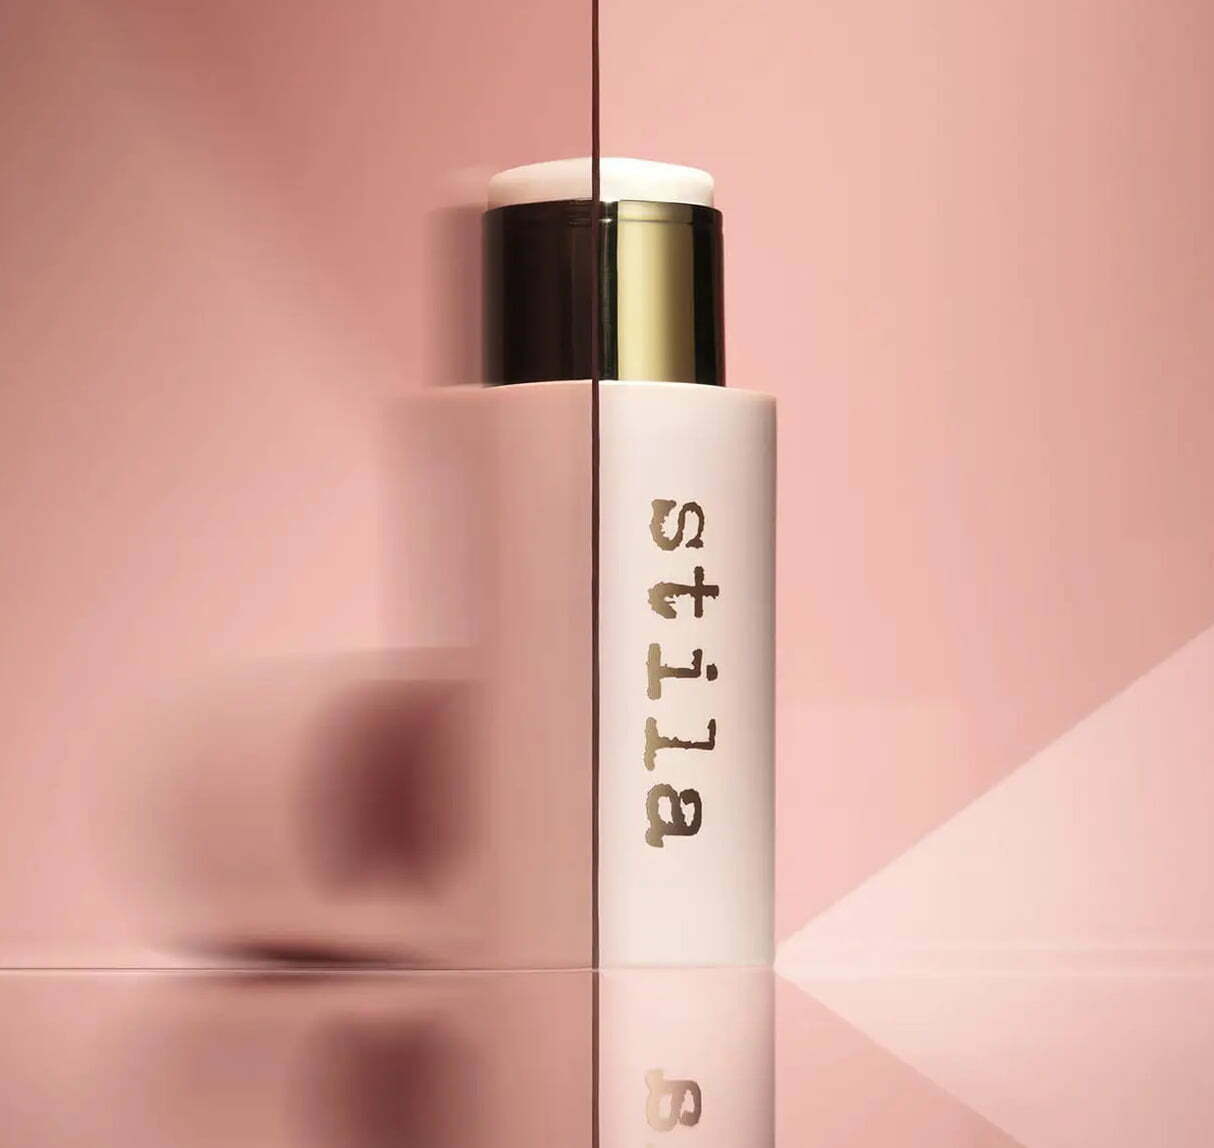 Stila All About The Blur Instant Blurring Stick